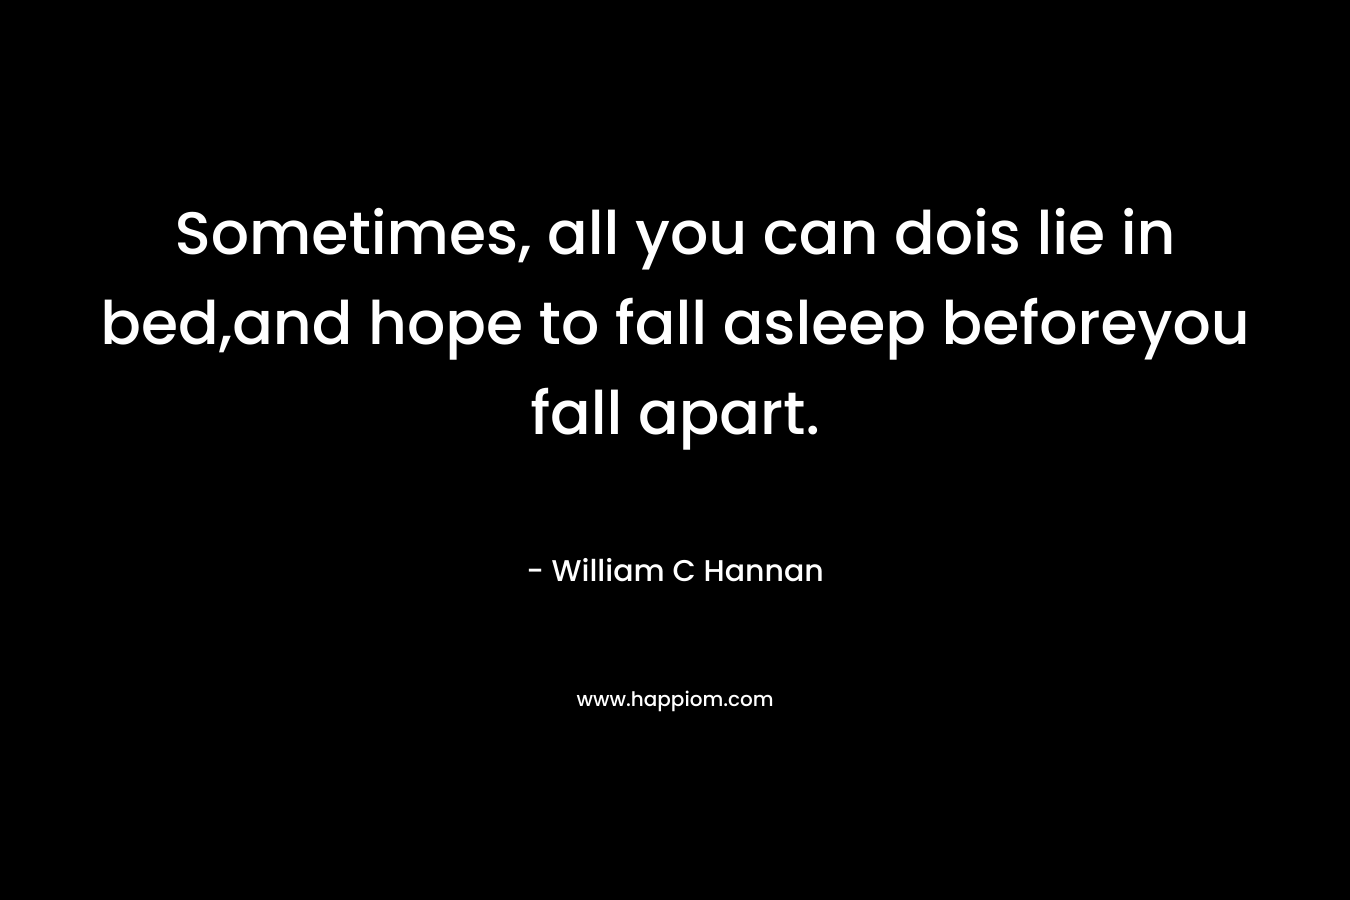 Sometimes, all you can dois lie in bed,and hope to fall asleep beforeyou fall apart. – William C Hannan